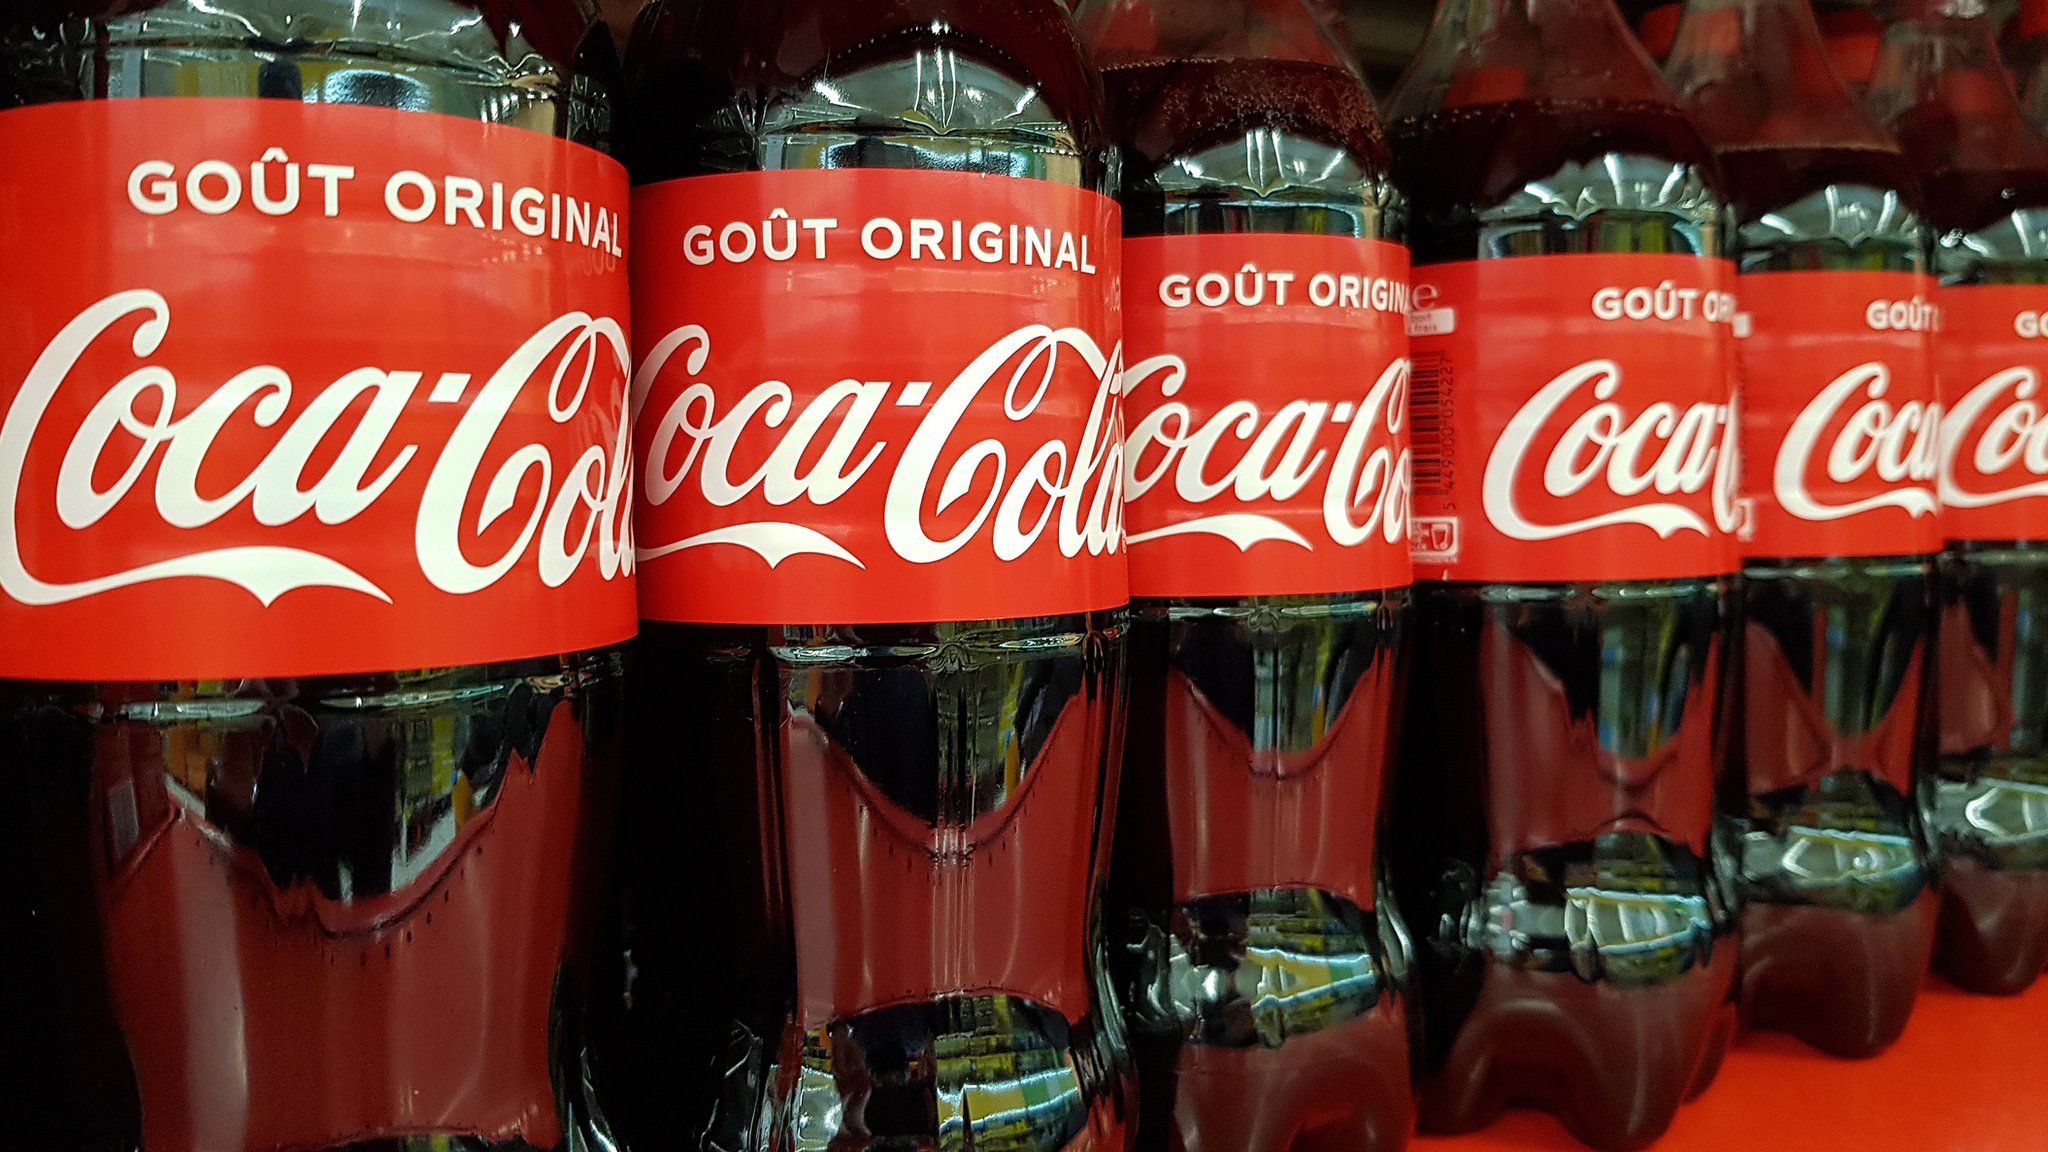 Coca-Cola bottles on sale at a supermarket in Nice, France (20 January 2020)